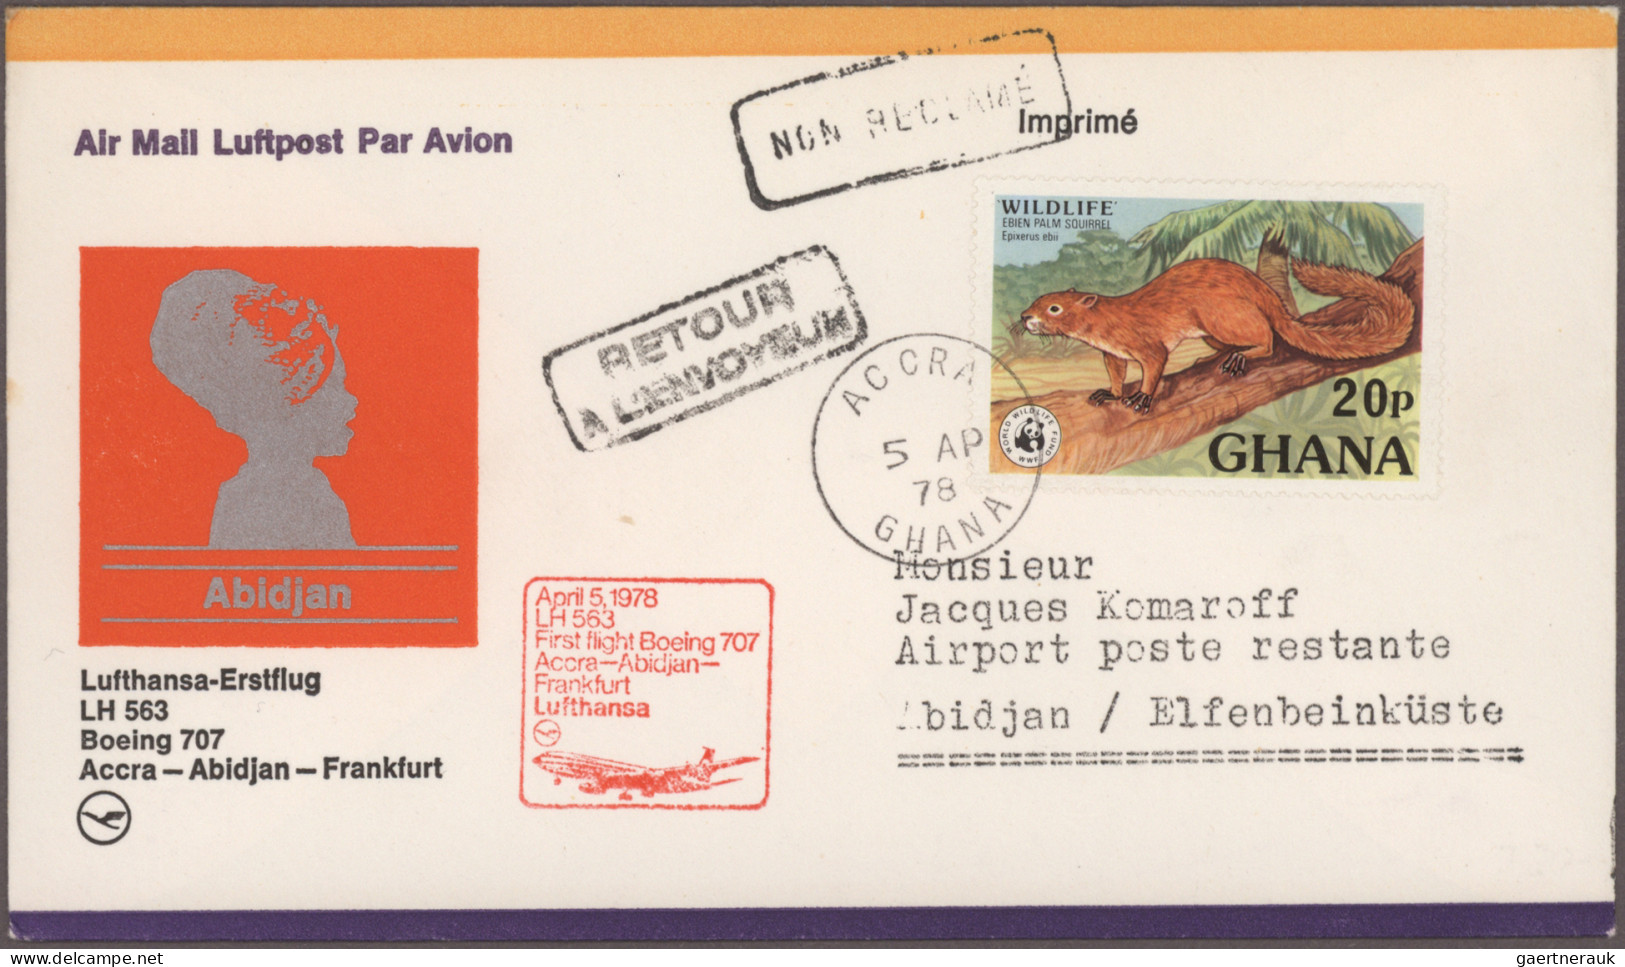 Africa: 1963/1988, balance of apprx. 118 FIRST FLIGHT covers/cards, all Africa-r